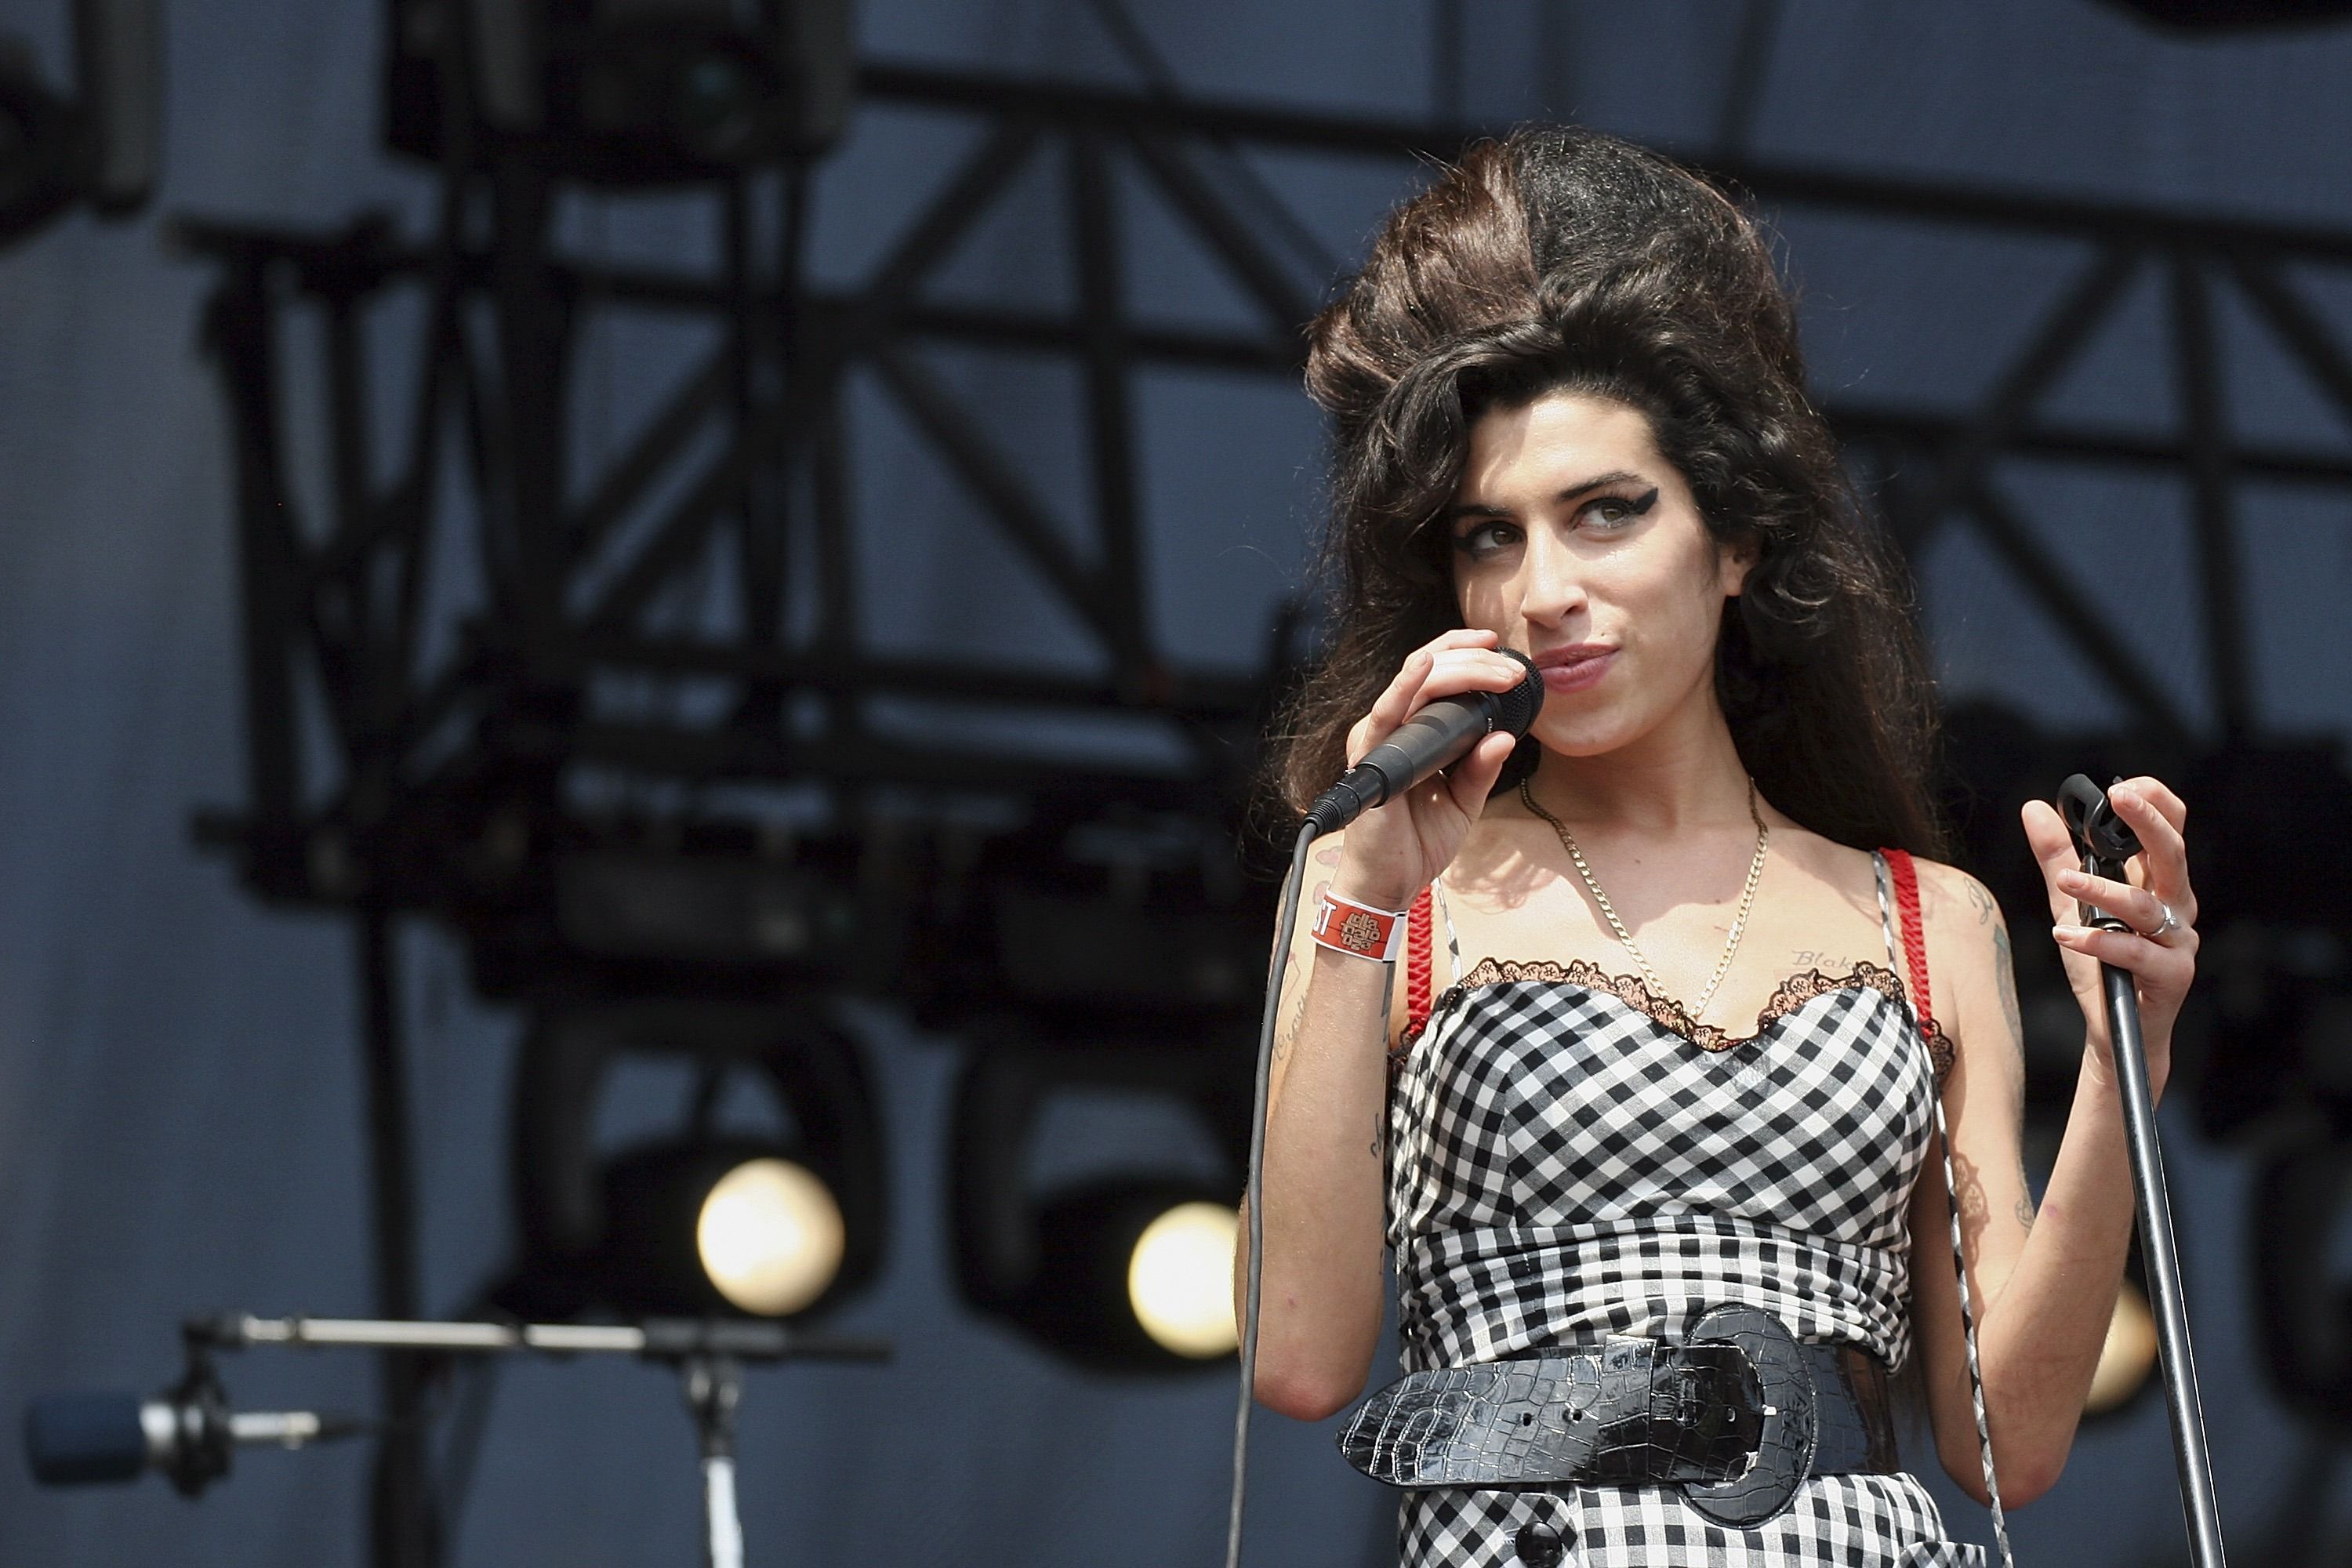 The late Amy Winehouse performs onstage at Lollapalooza in Grant Park on August 5, 2007 in Chicago, Illinois. | Photo: Getty Images